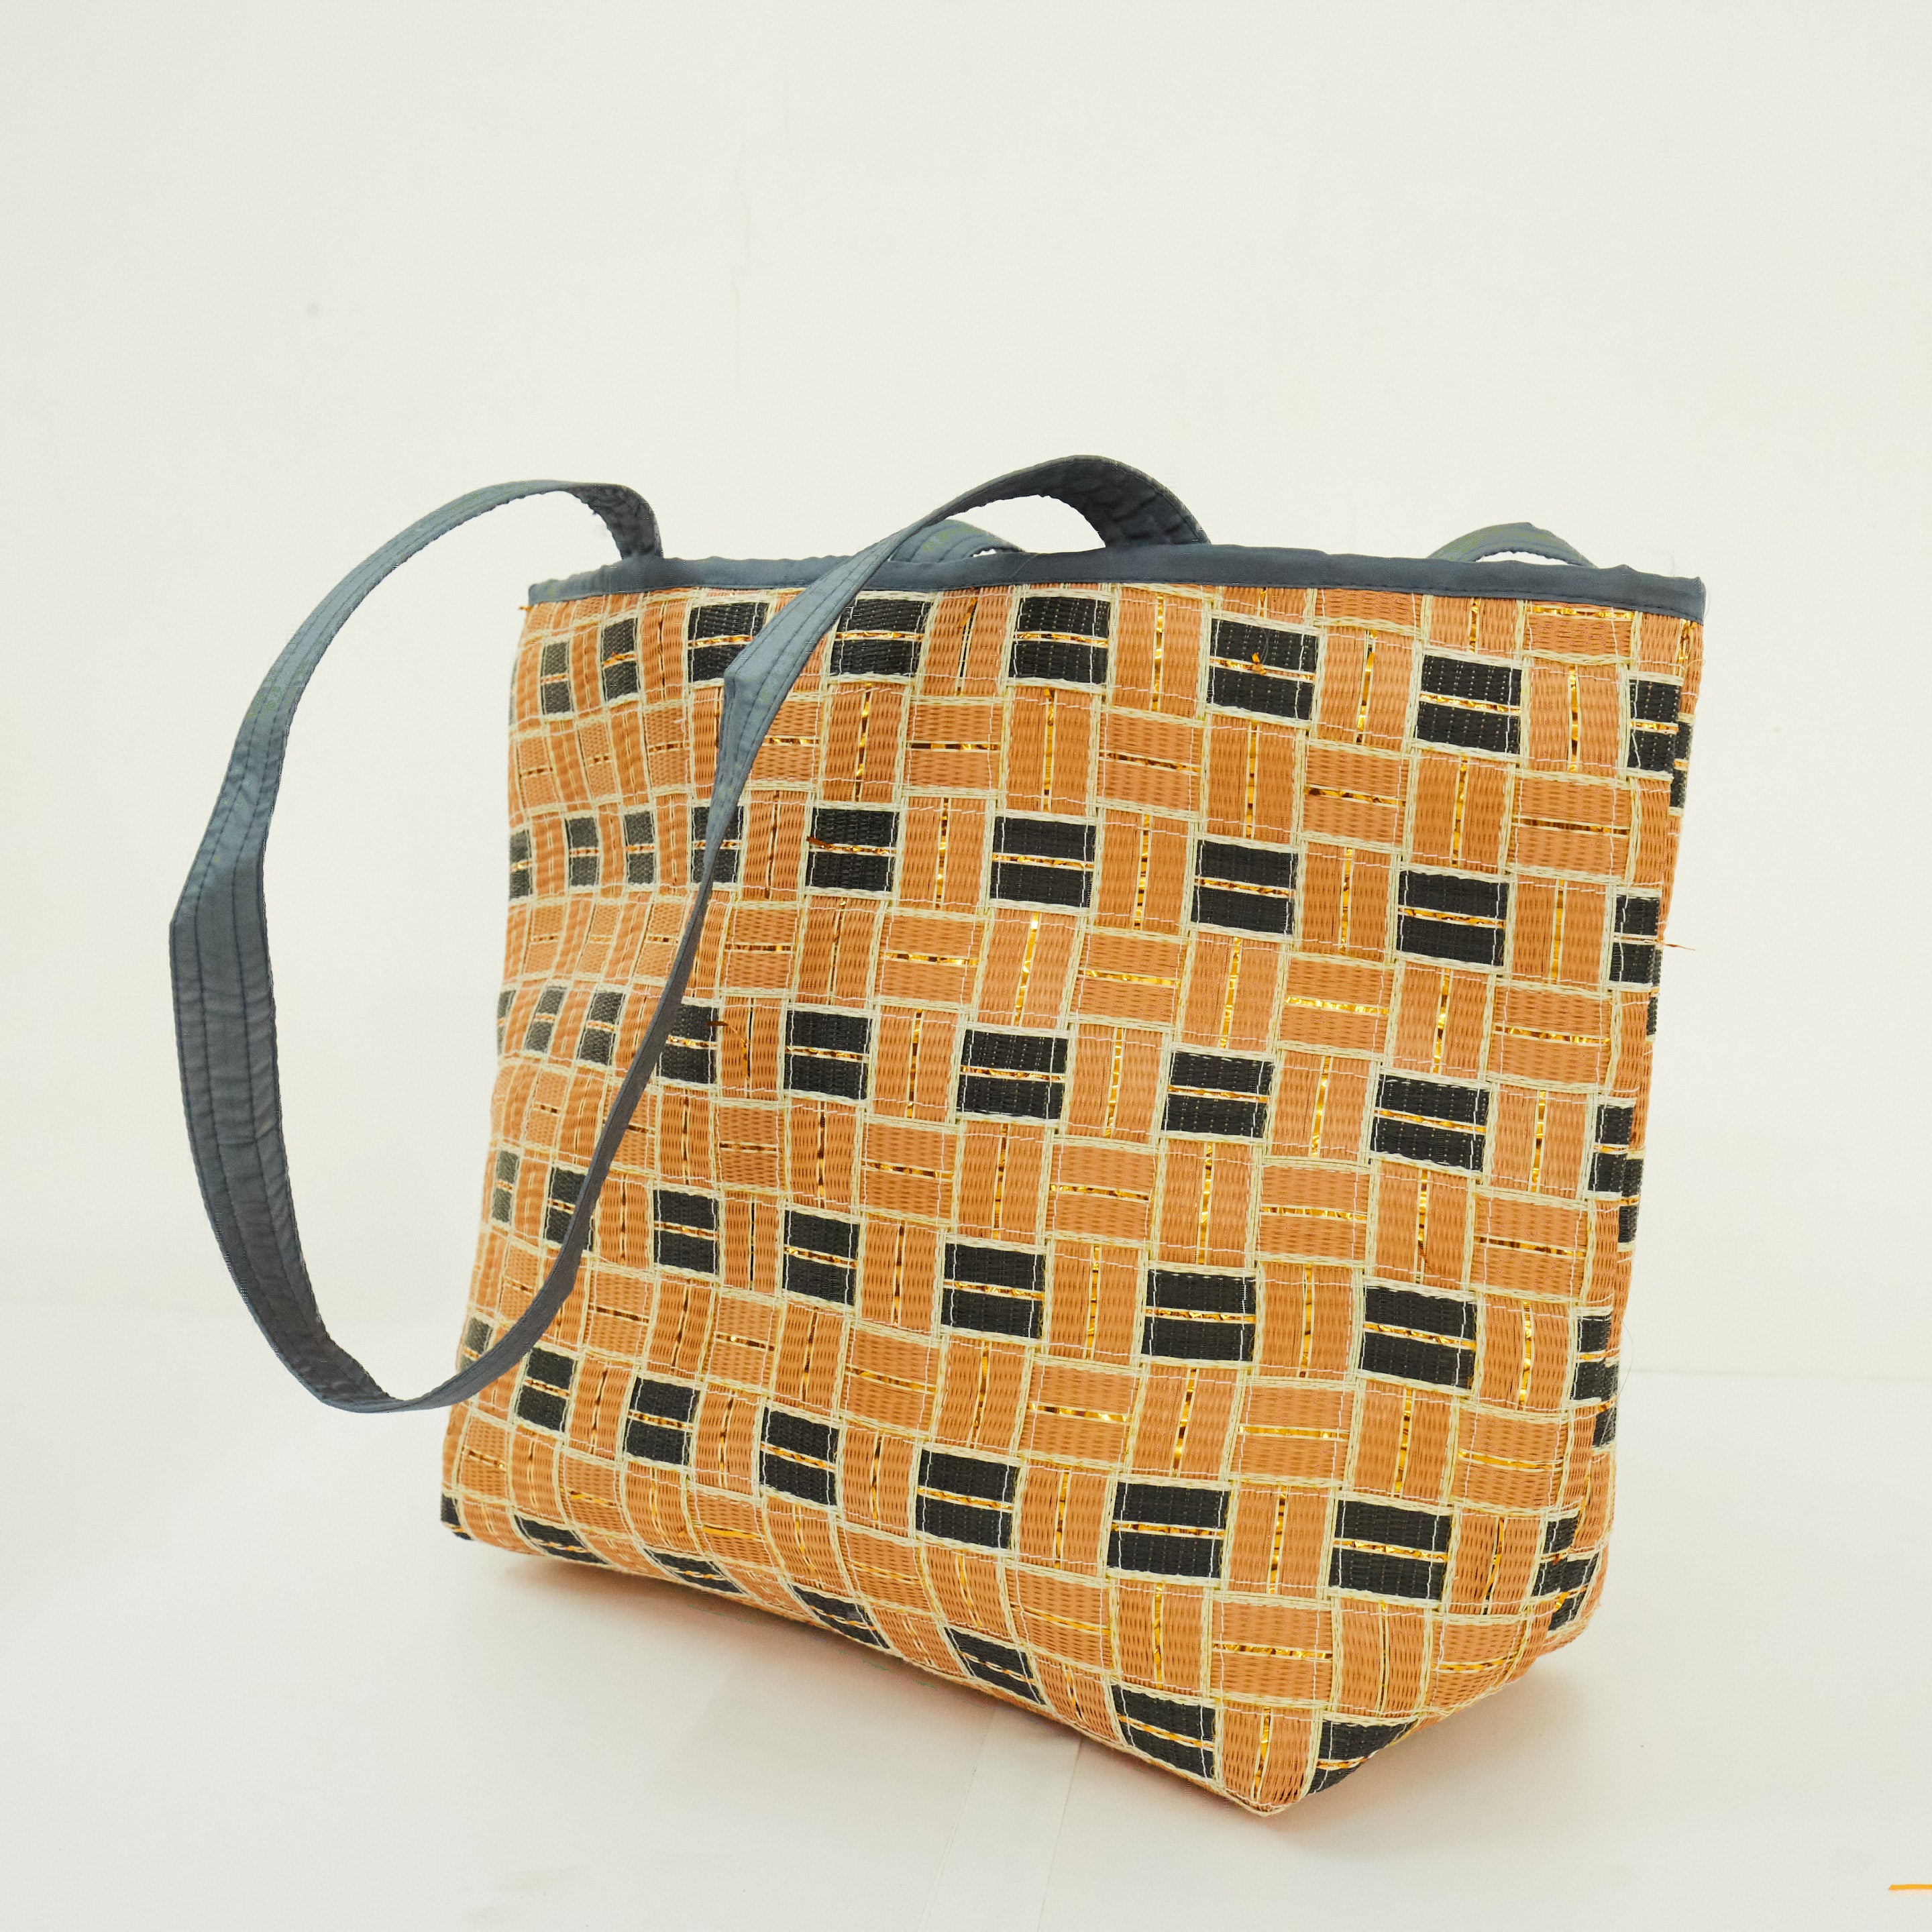 Packable Tote - Hazy Tan | Reusable tote bag made from recycled materials